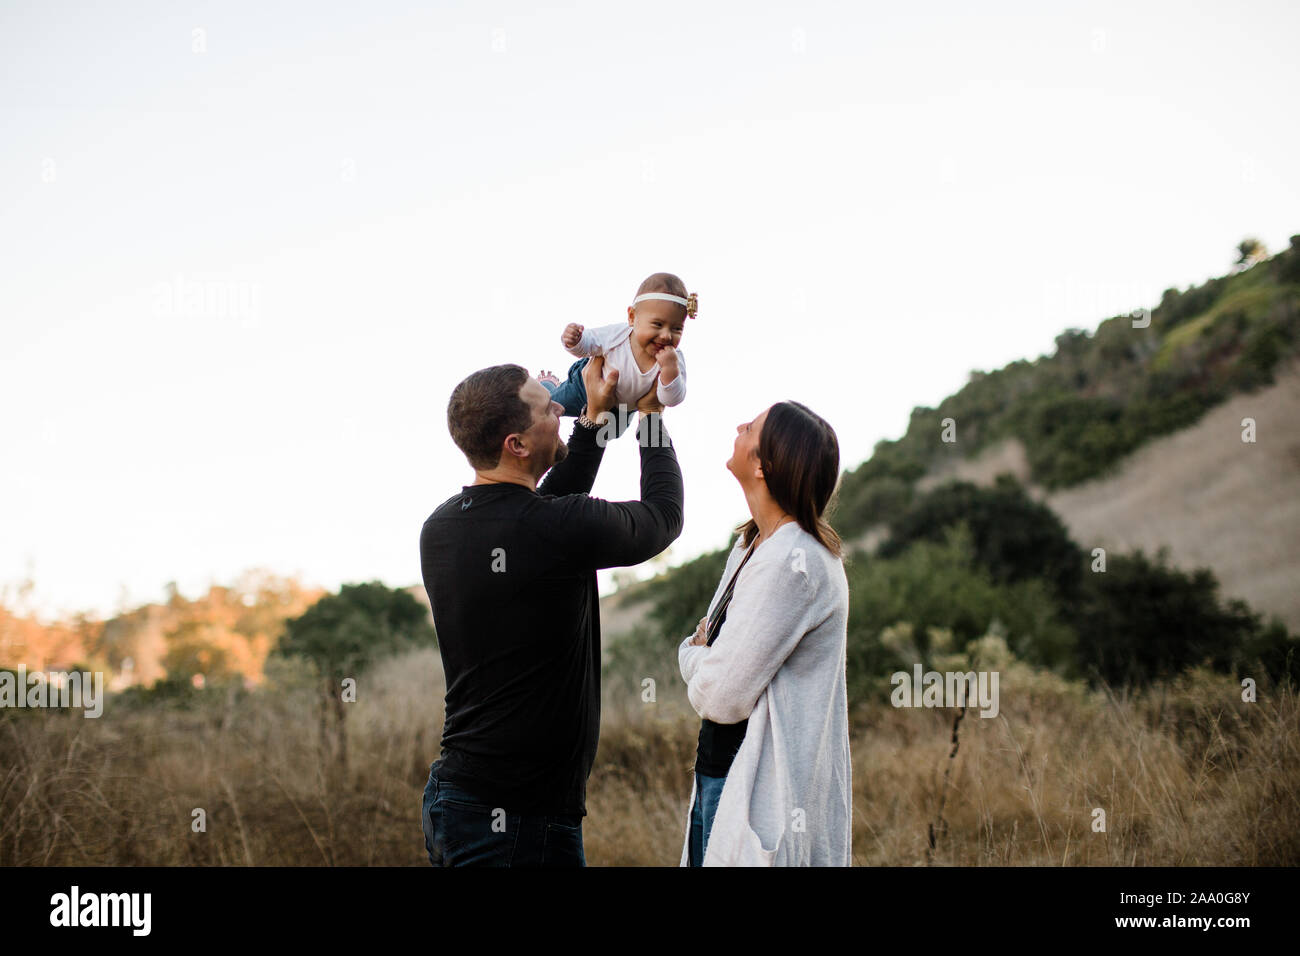 Dad Lifting Infant Daughter as Mom Watches and Smiles Stock Photo